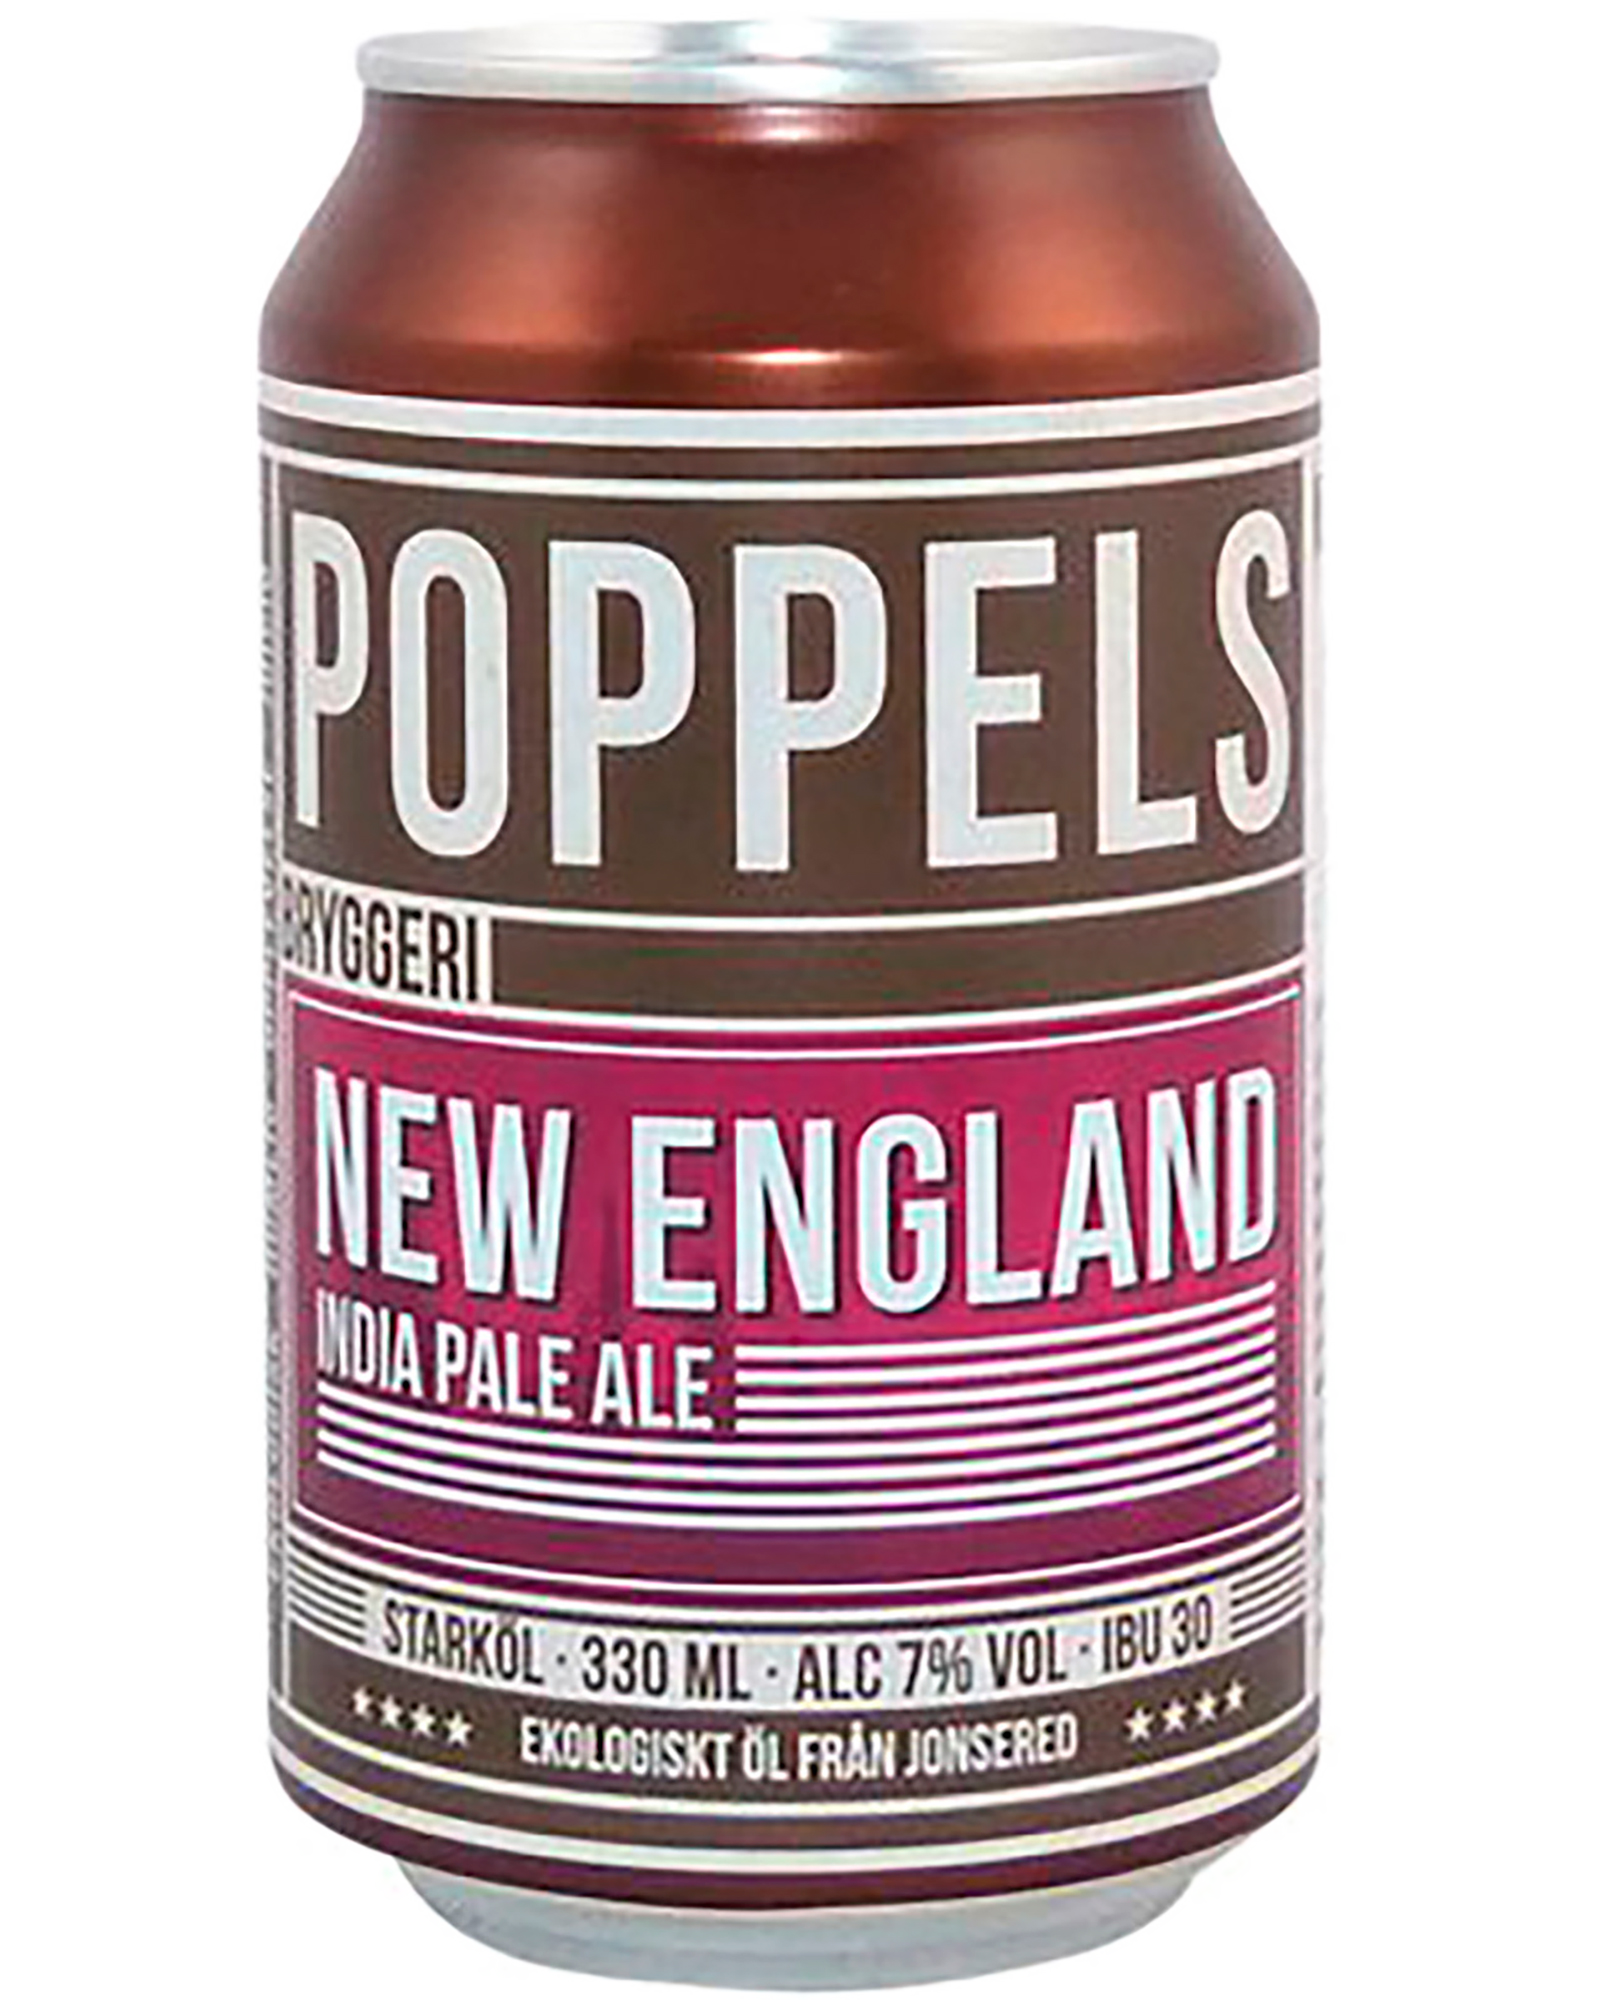 Poppels New England India Pale Ale can